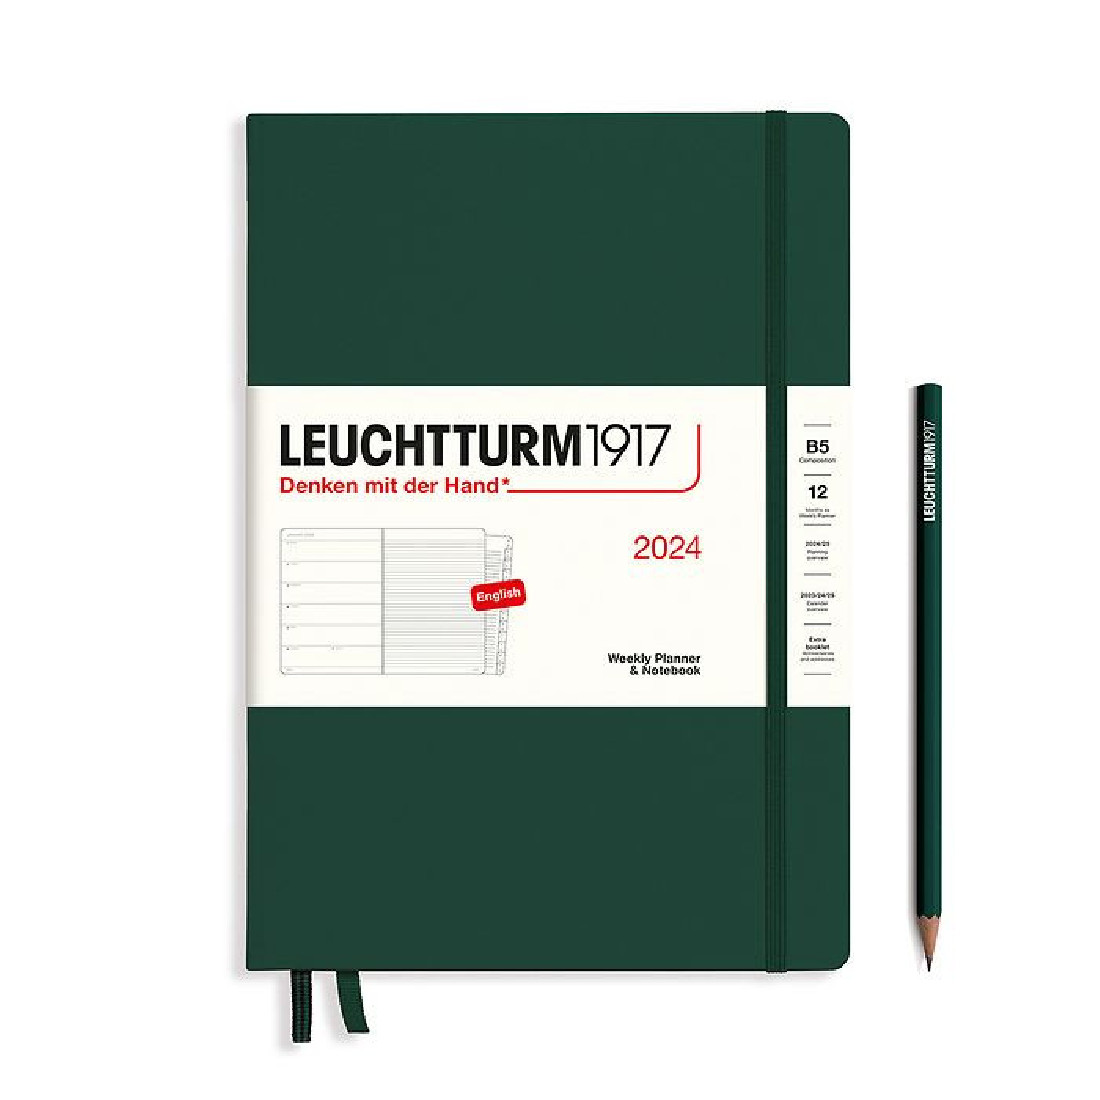 Leuchtturm 1917 Weekly Planner and Notebook 2024 Forest Green B5 Hard Cover